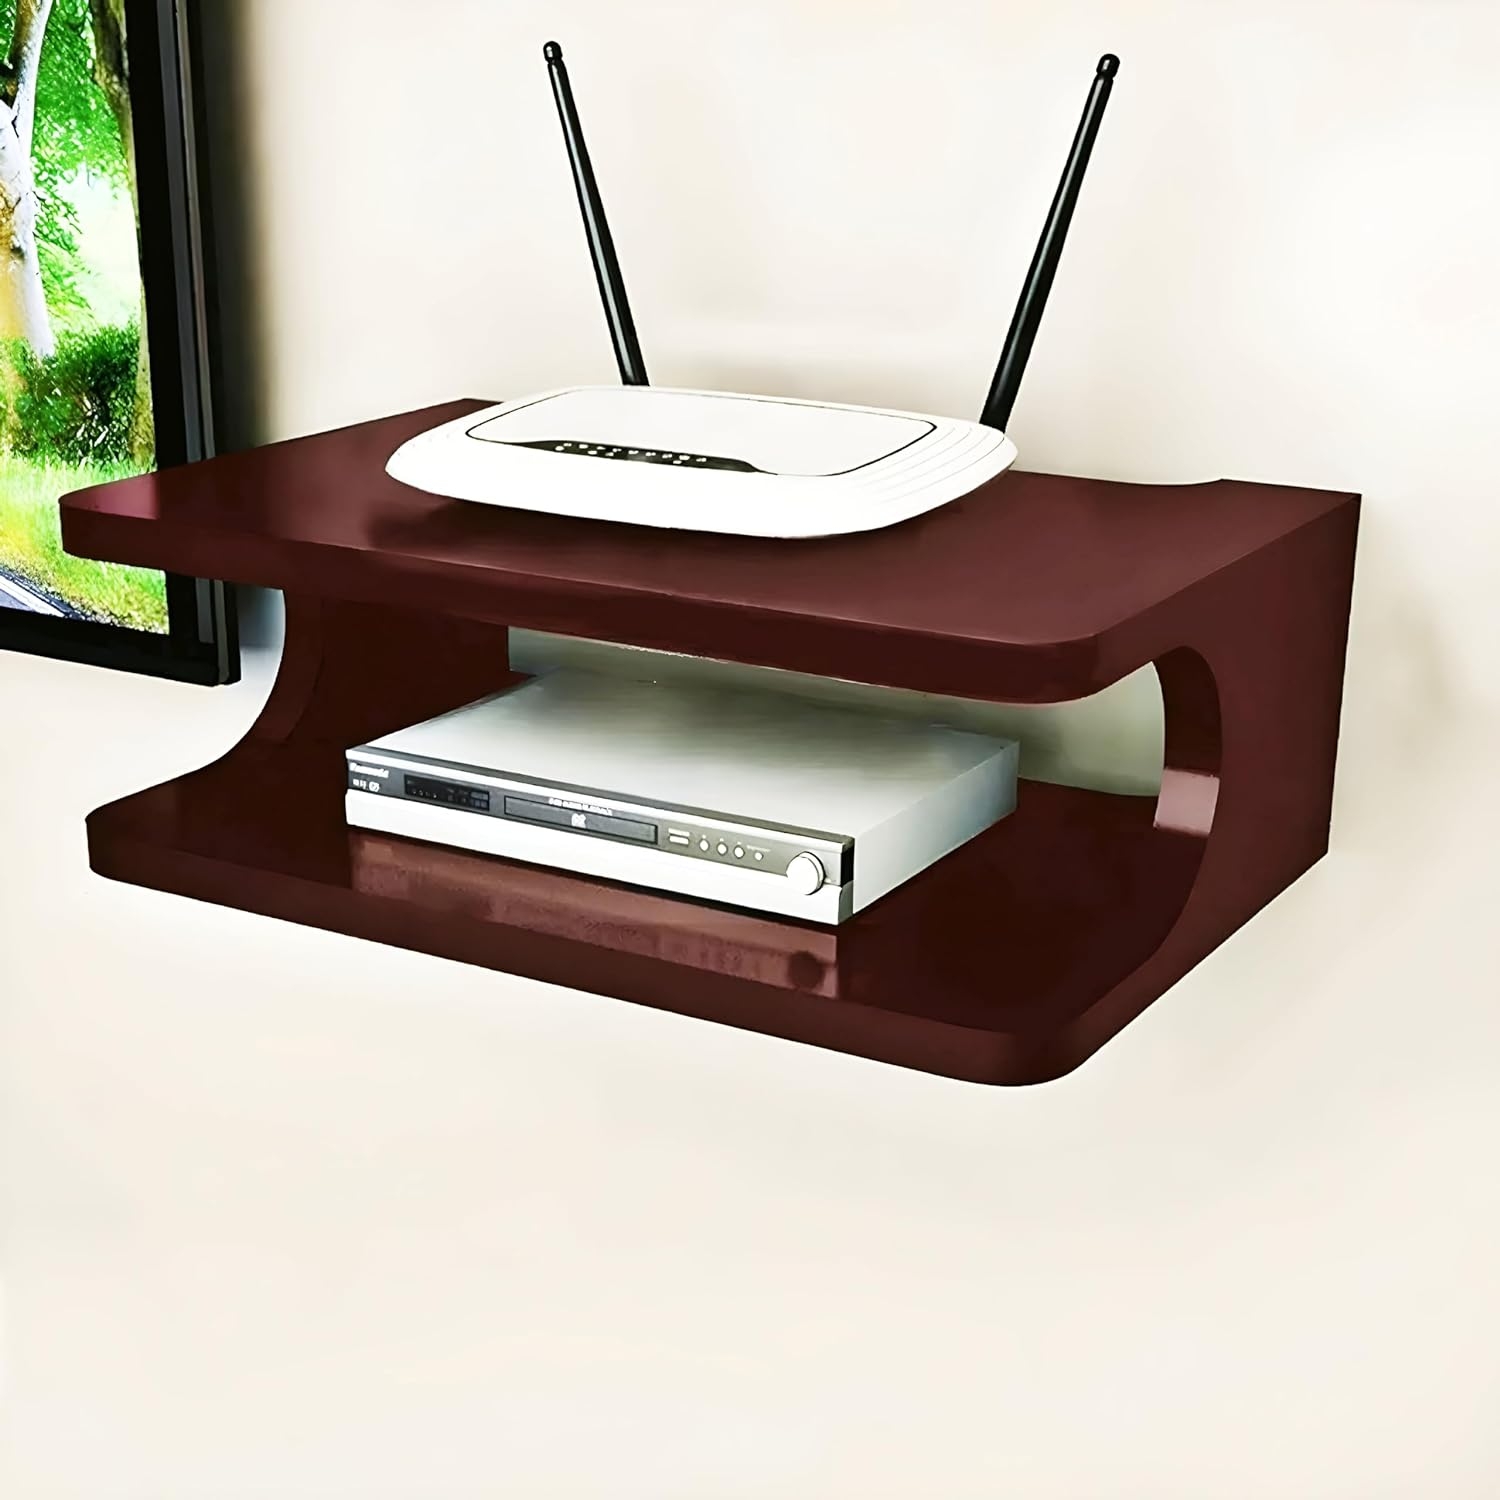 Set top Box Stand | WiFi Router Holder Wooden Wall Shelves for Home | Wall Mount TV Cabinet for Living Room